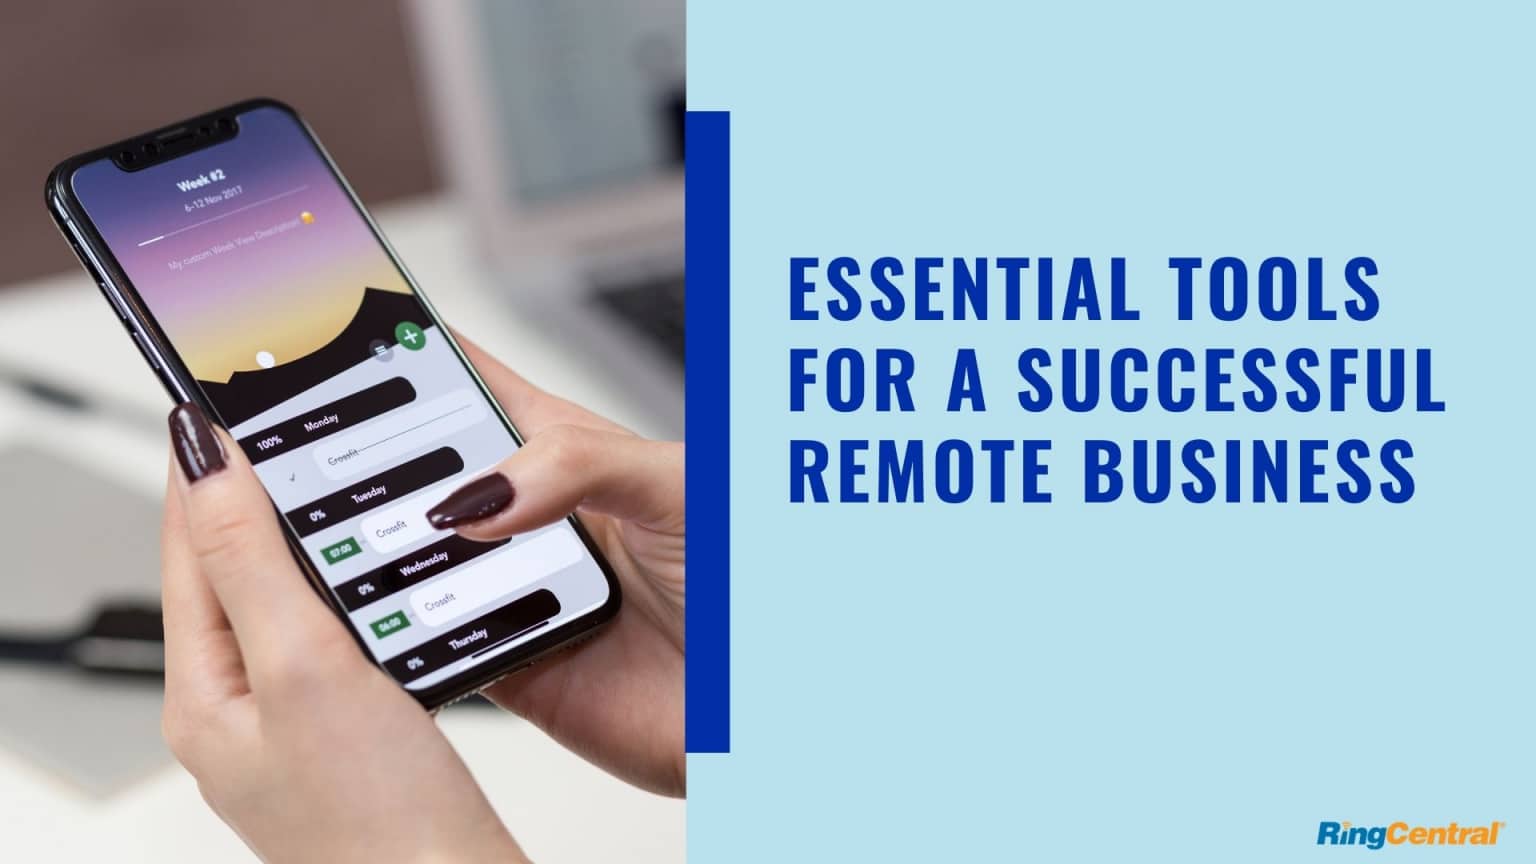 Essential tools for a successful remote business